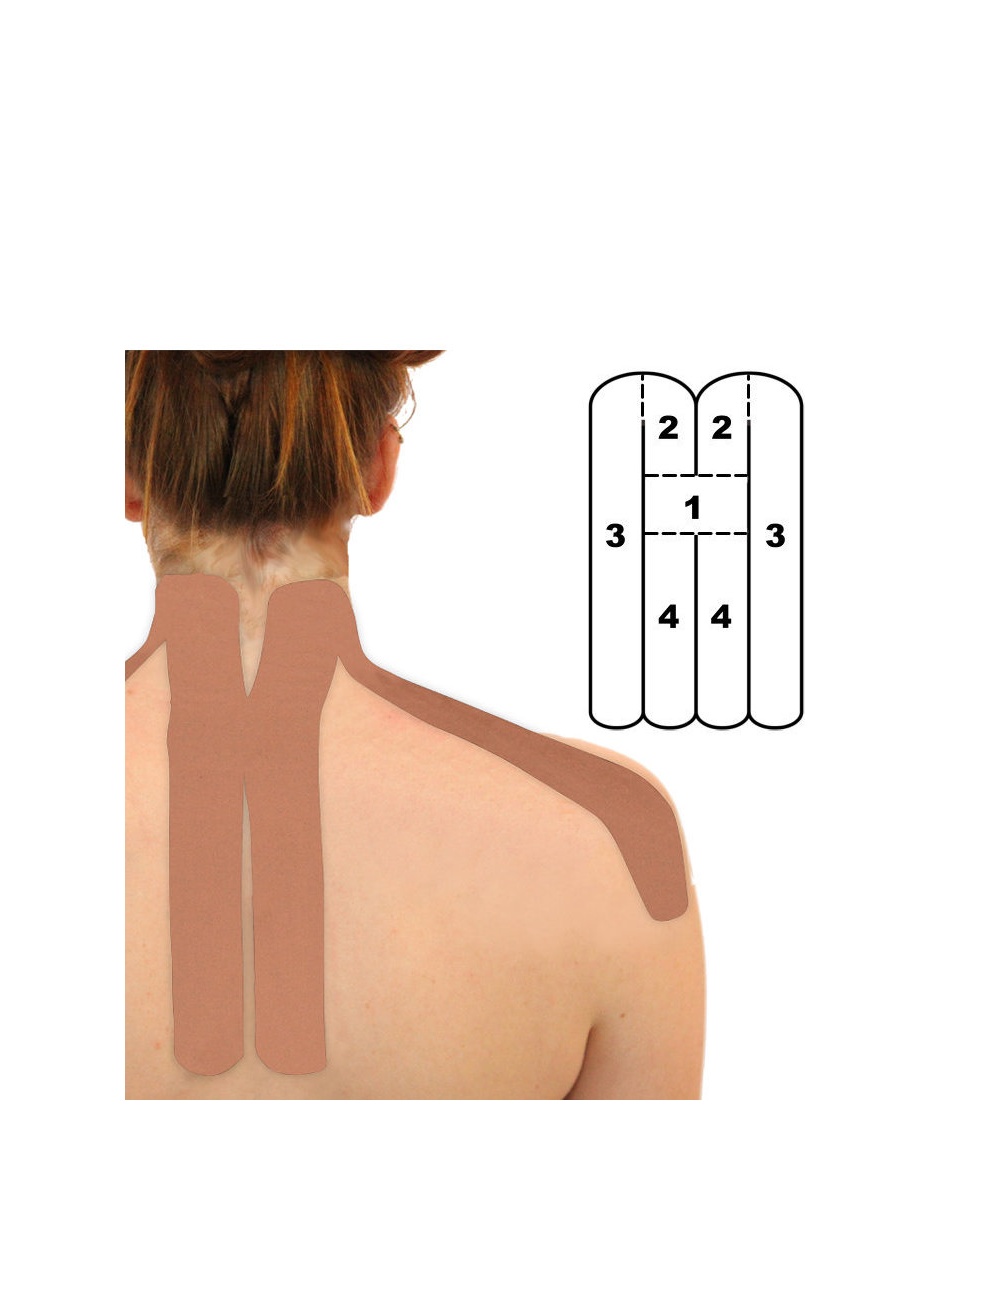 KINESIO Pre Cut Tape Kinesiology tape for NECK injuries & support. 